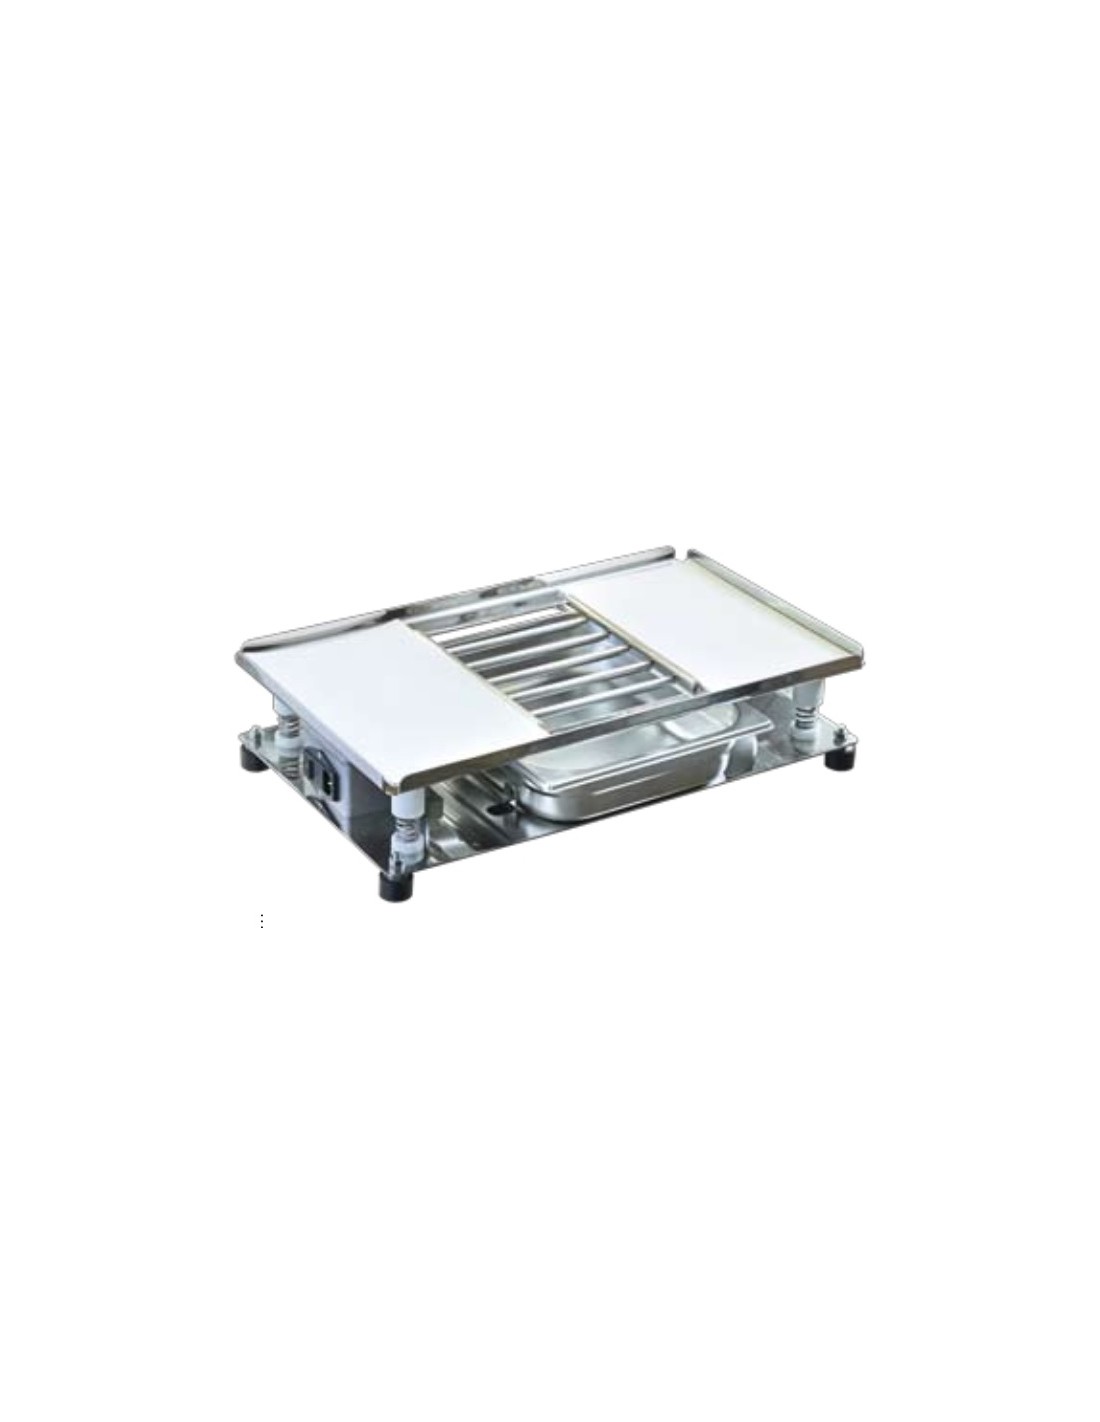 Vibration table with grill - Cm 54 x 32